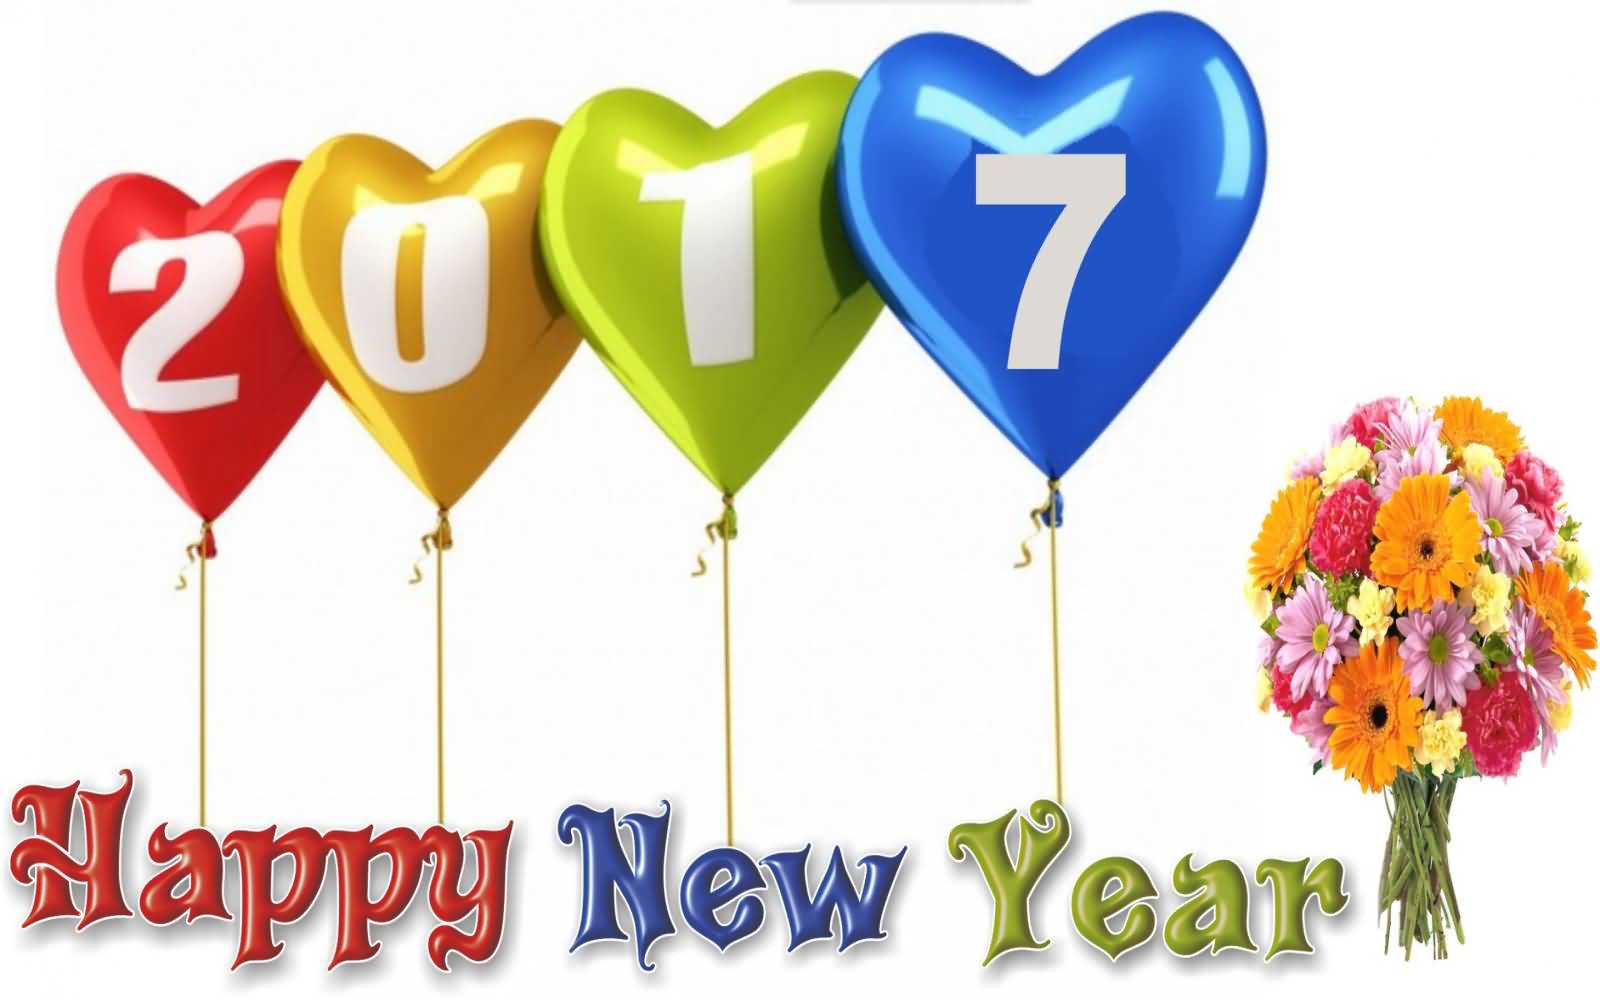 Happy New Year 2017 Balloons And Flowers Bouquet